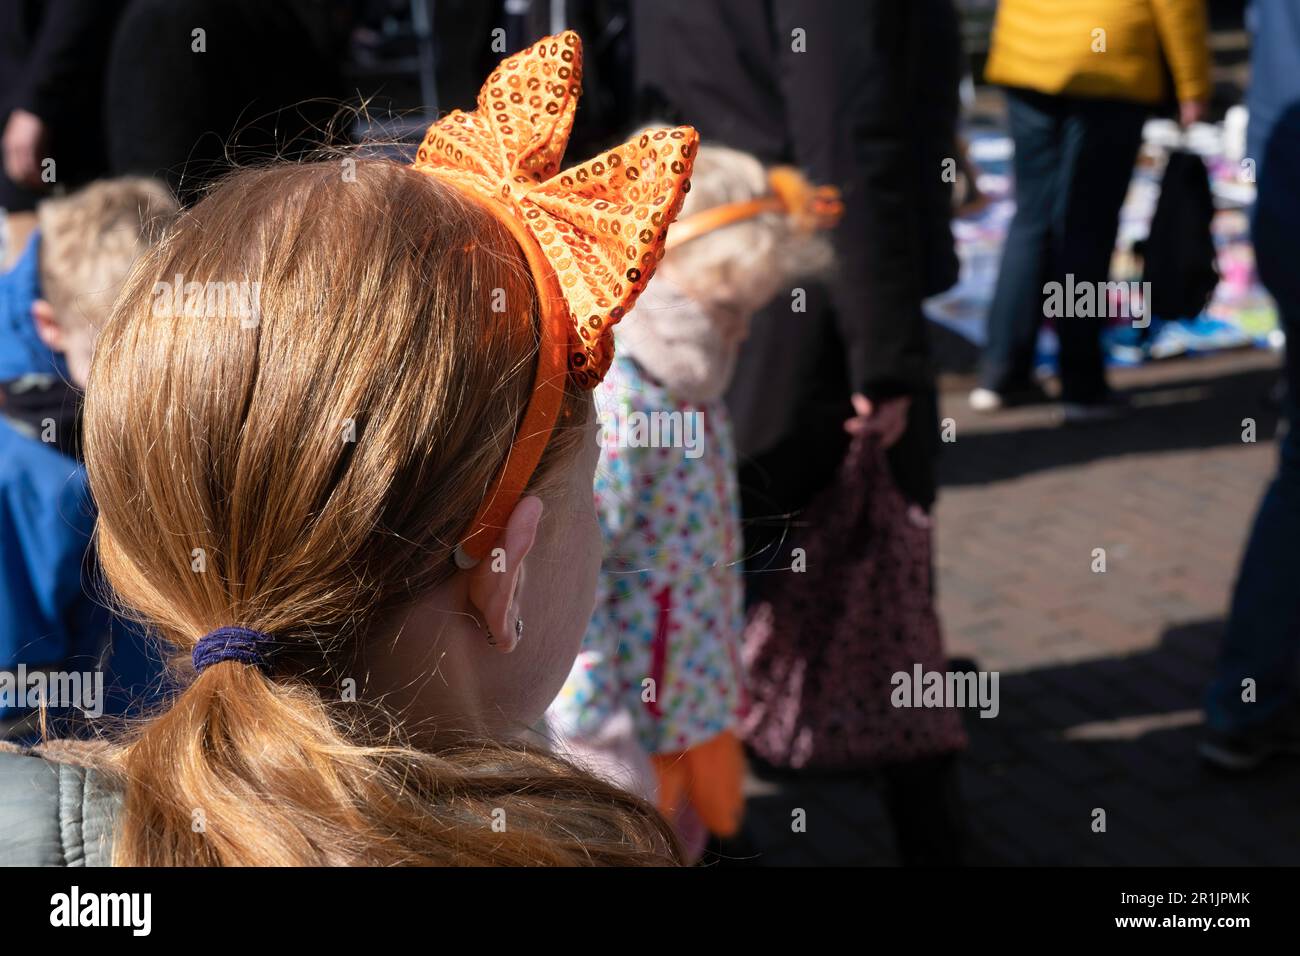 Girl with orange bow in her hair watches people walk by on King's Day ('Koningsdag'), the birthday of King Willem-Alexander of the Netherlands Stock Photo